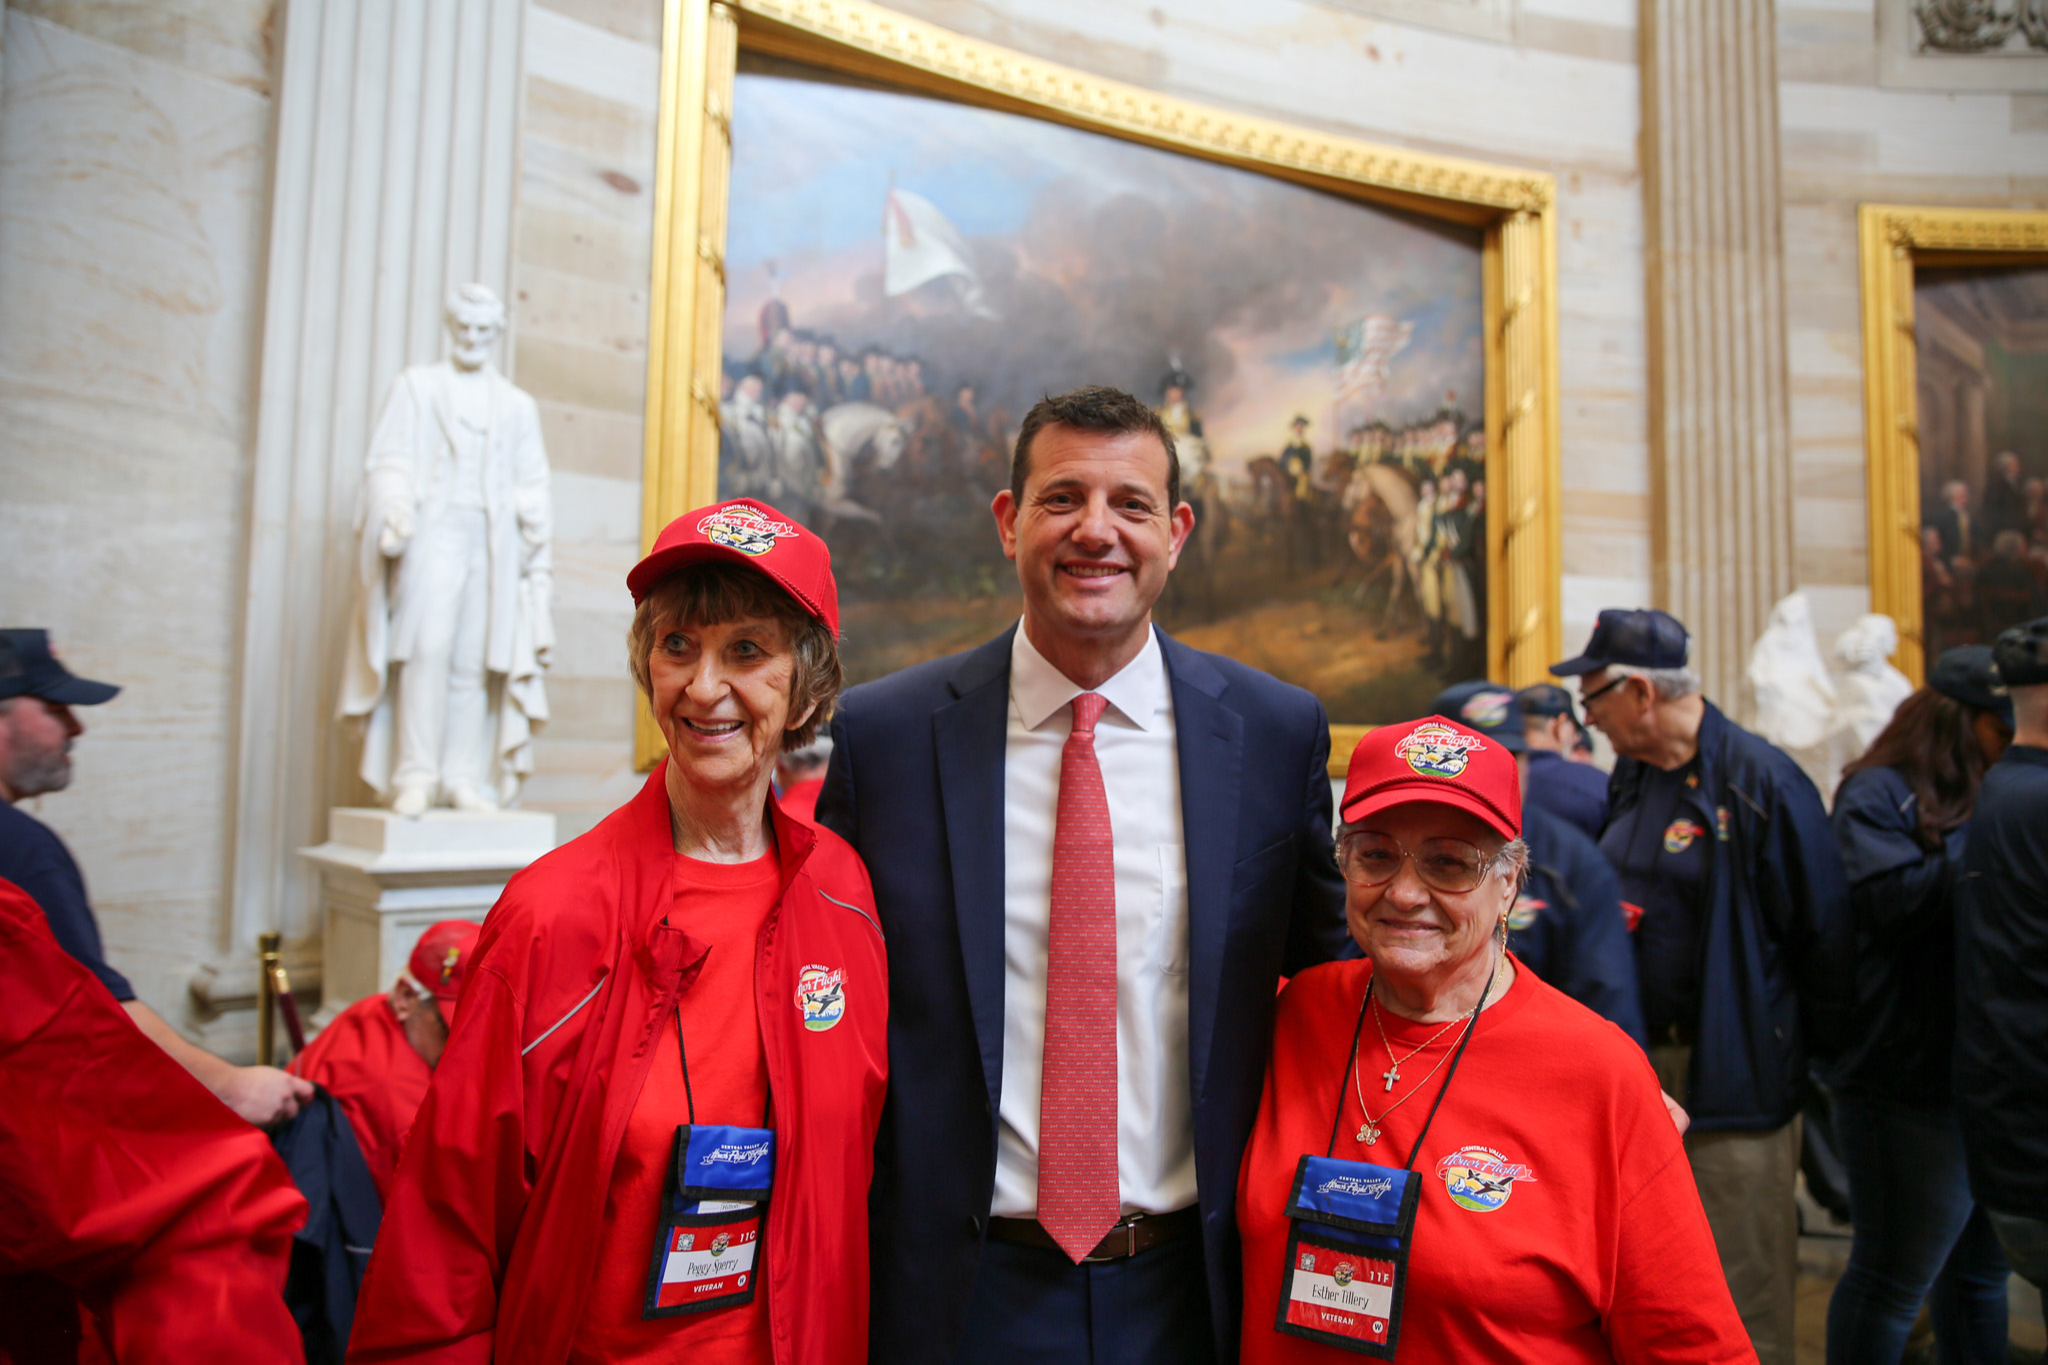 Rep. Valadao welcomes Valley Veterans to the Capitol